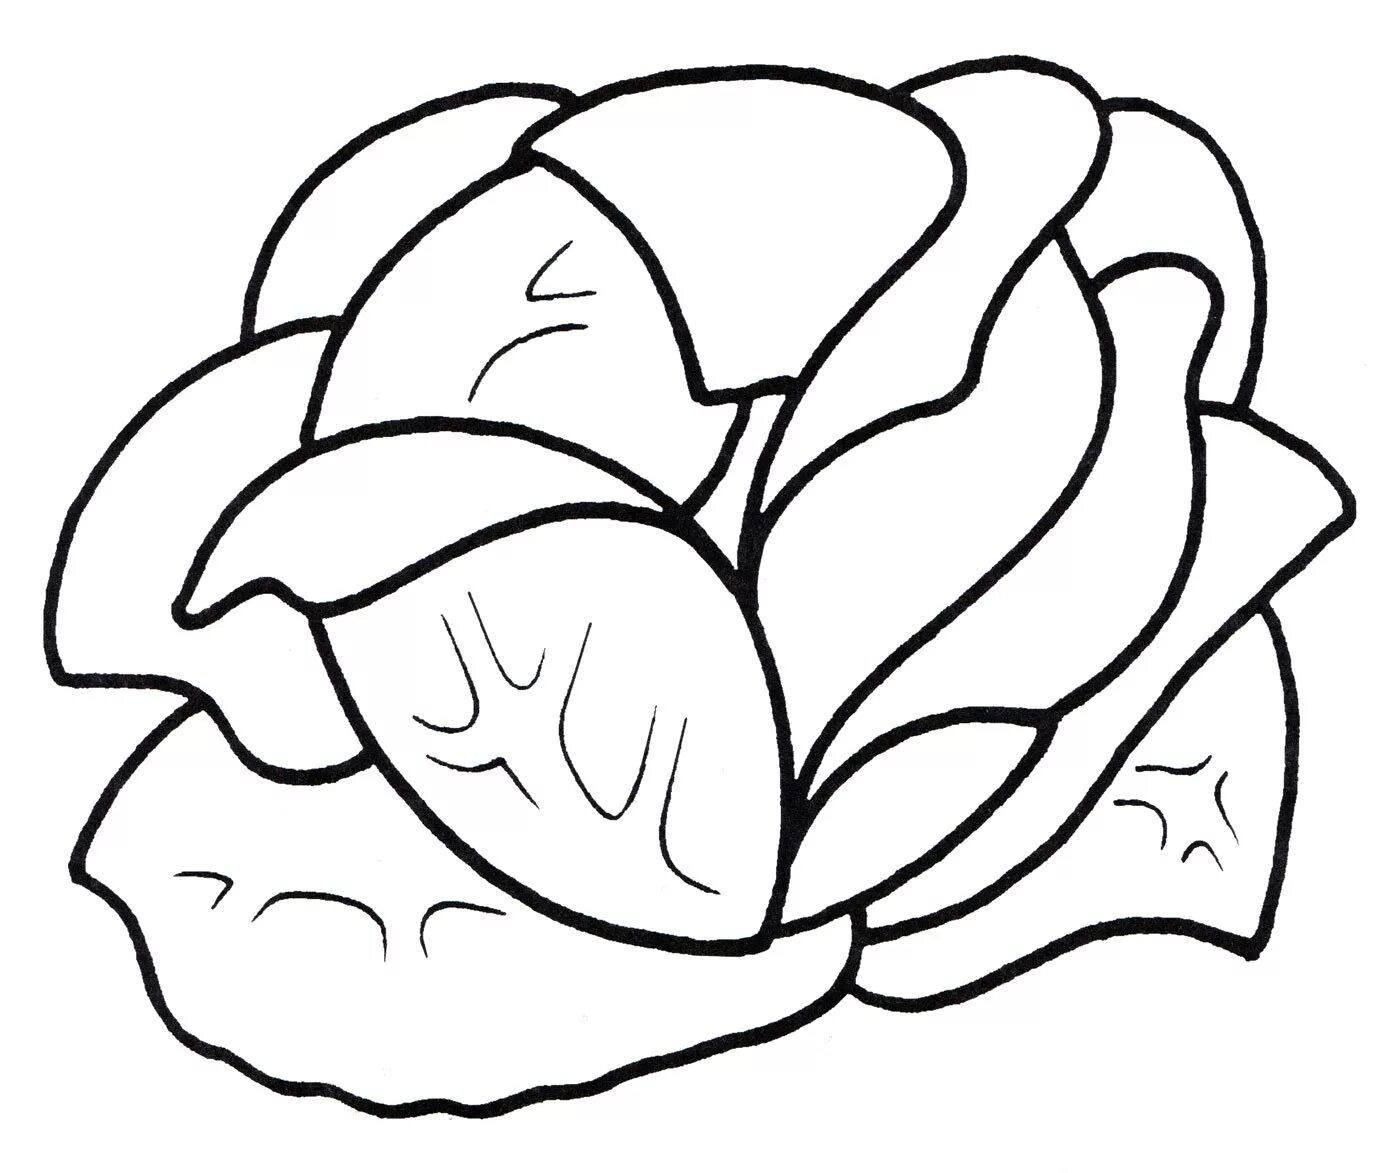 Colouring peaceful cabbage for children 3-4 years old